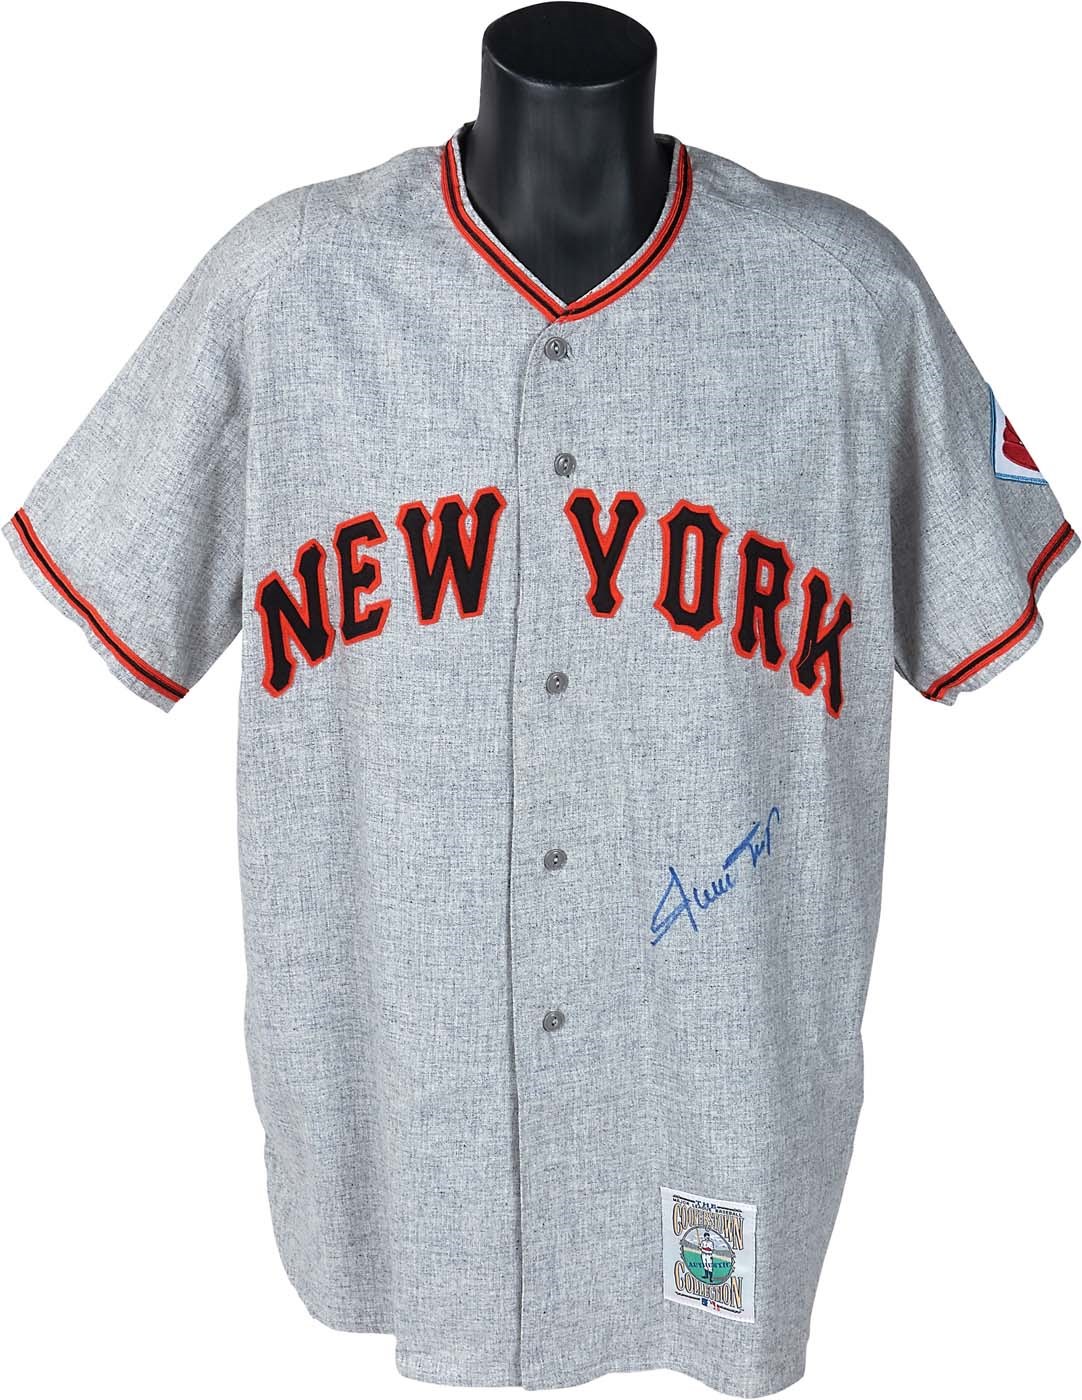 - Willie Mays Signed Mitchell & Ness Jersey